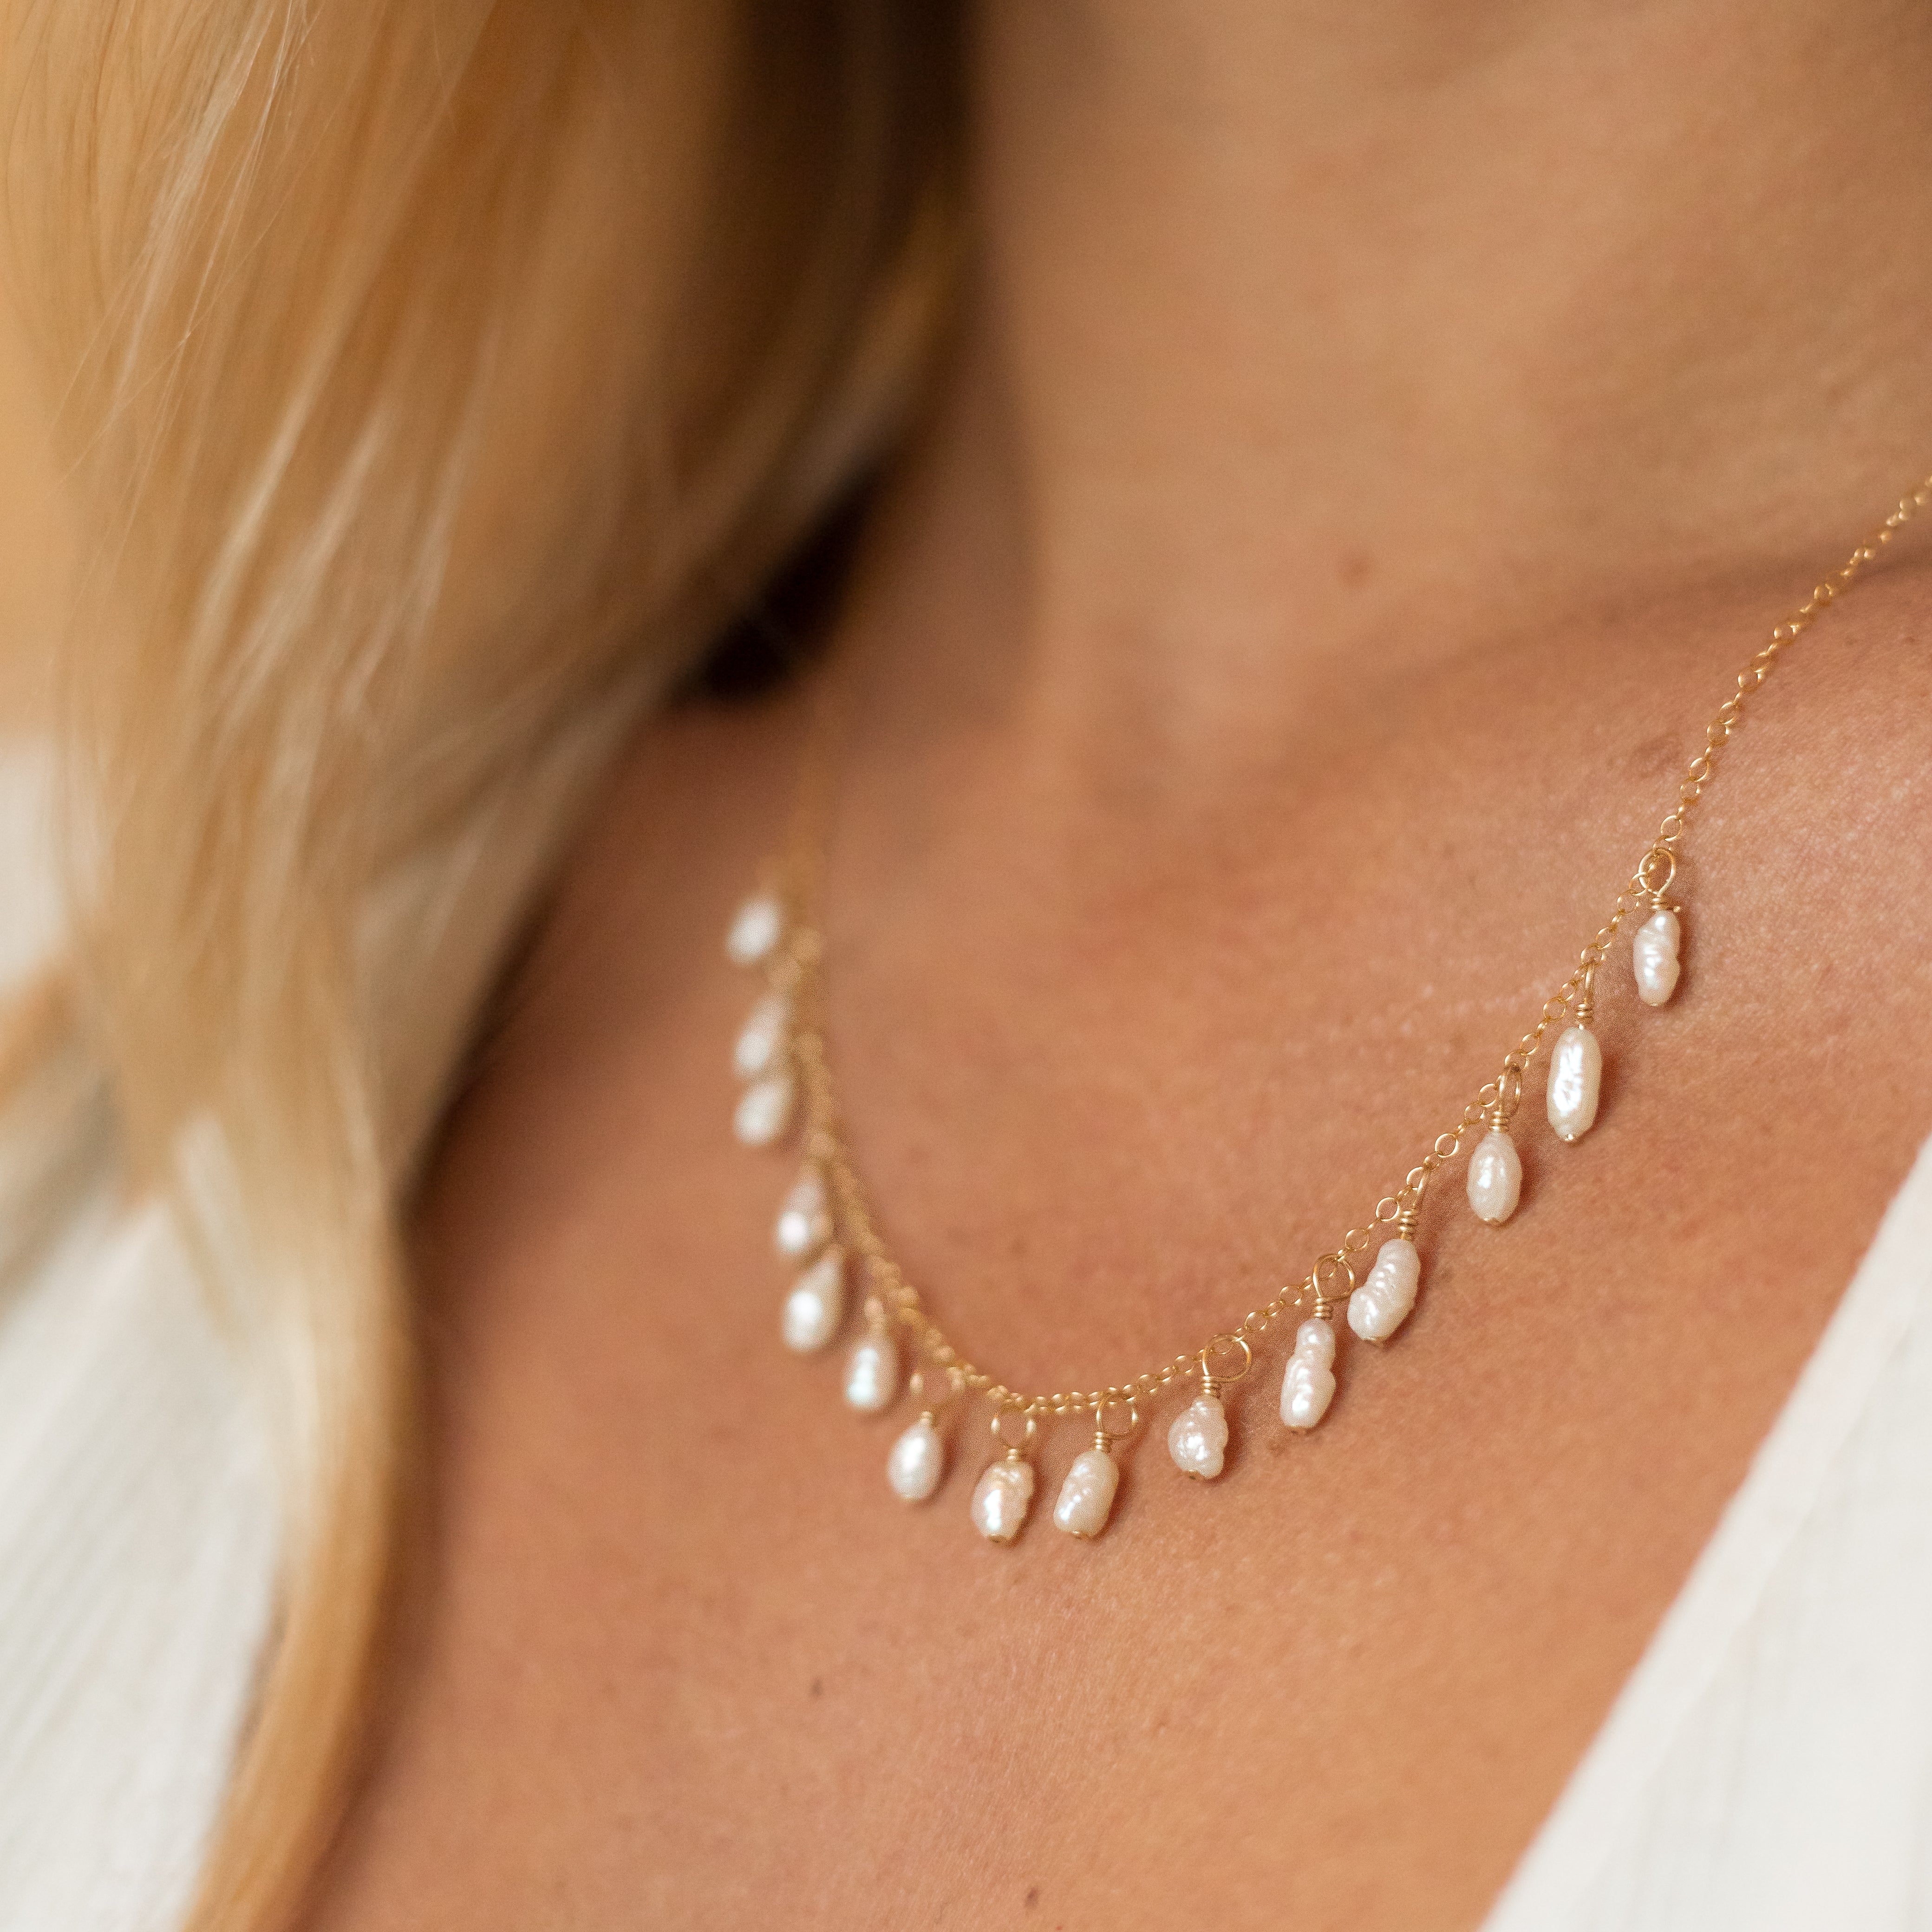 Gold chain with 15 pea sized freshwater pearls attached to it. Shown on a woman's neck. 